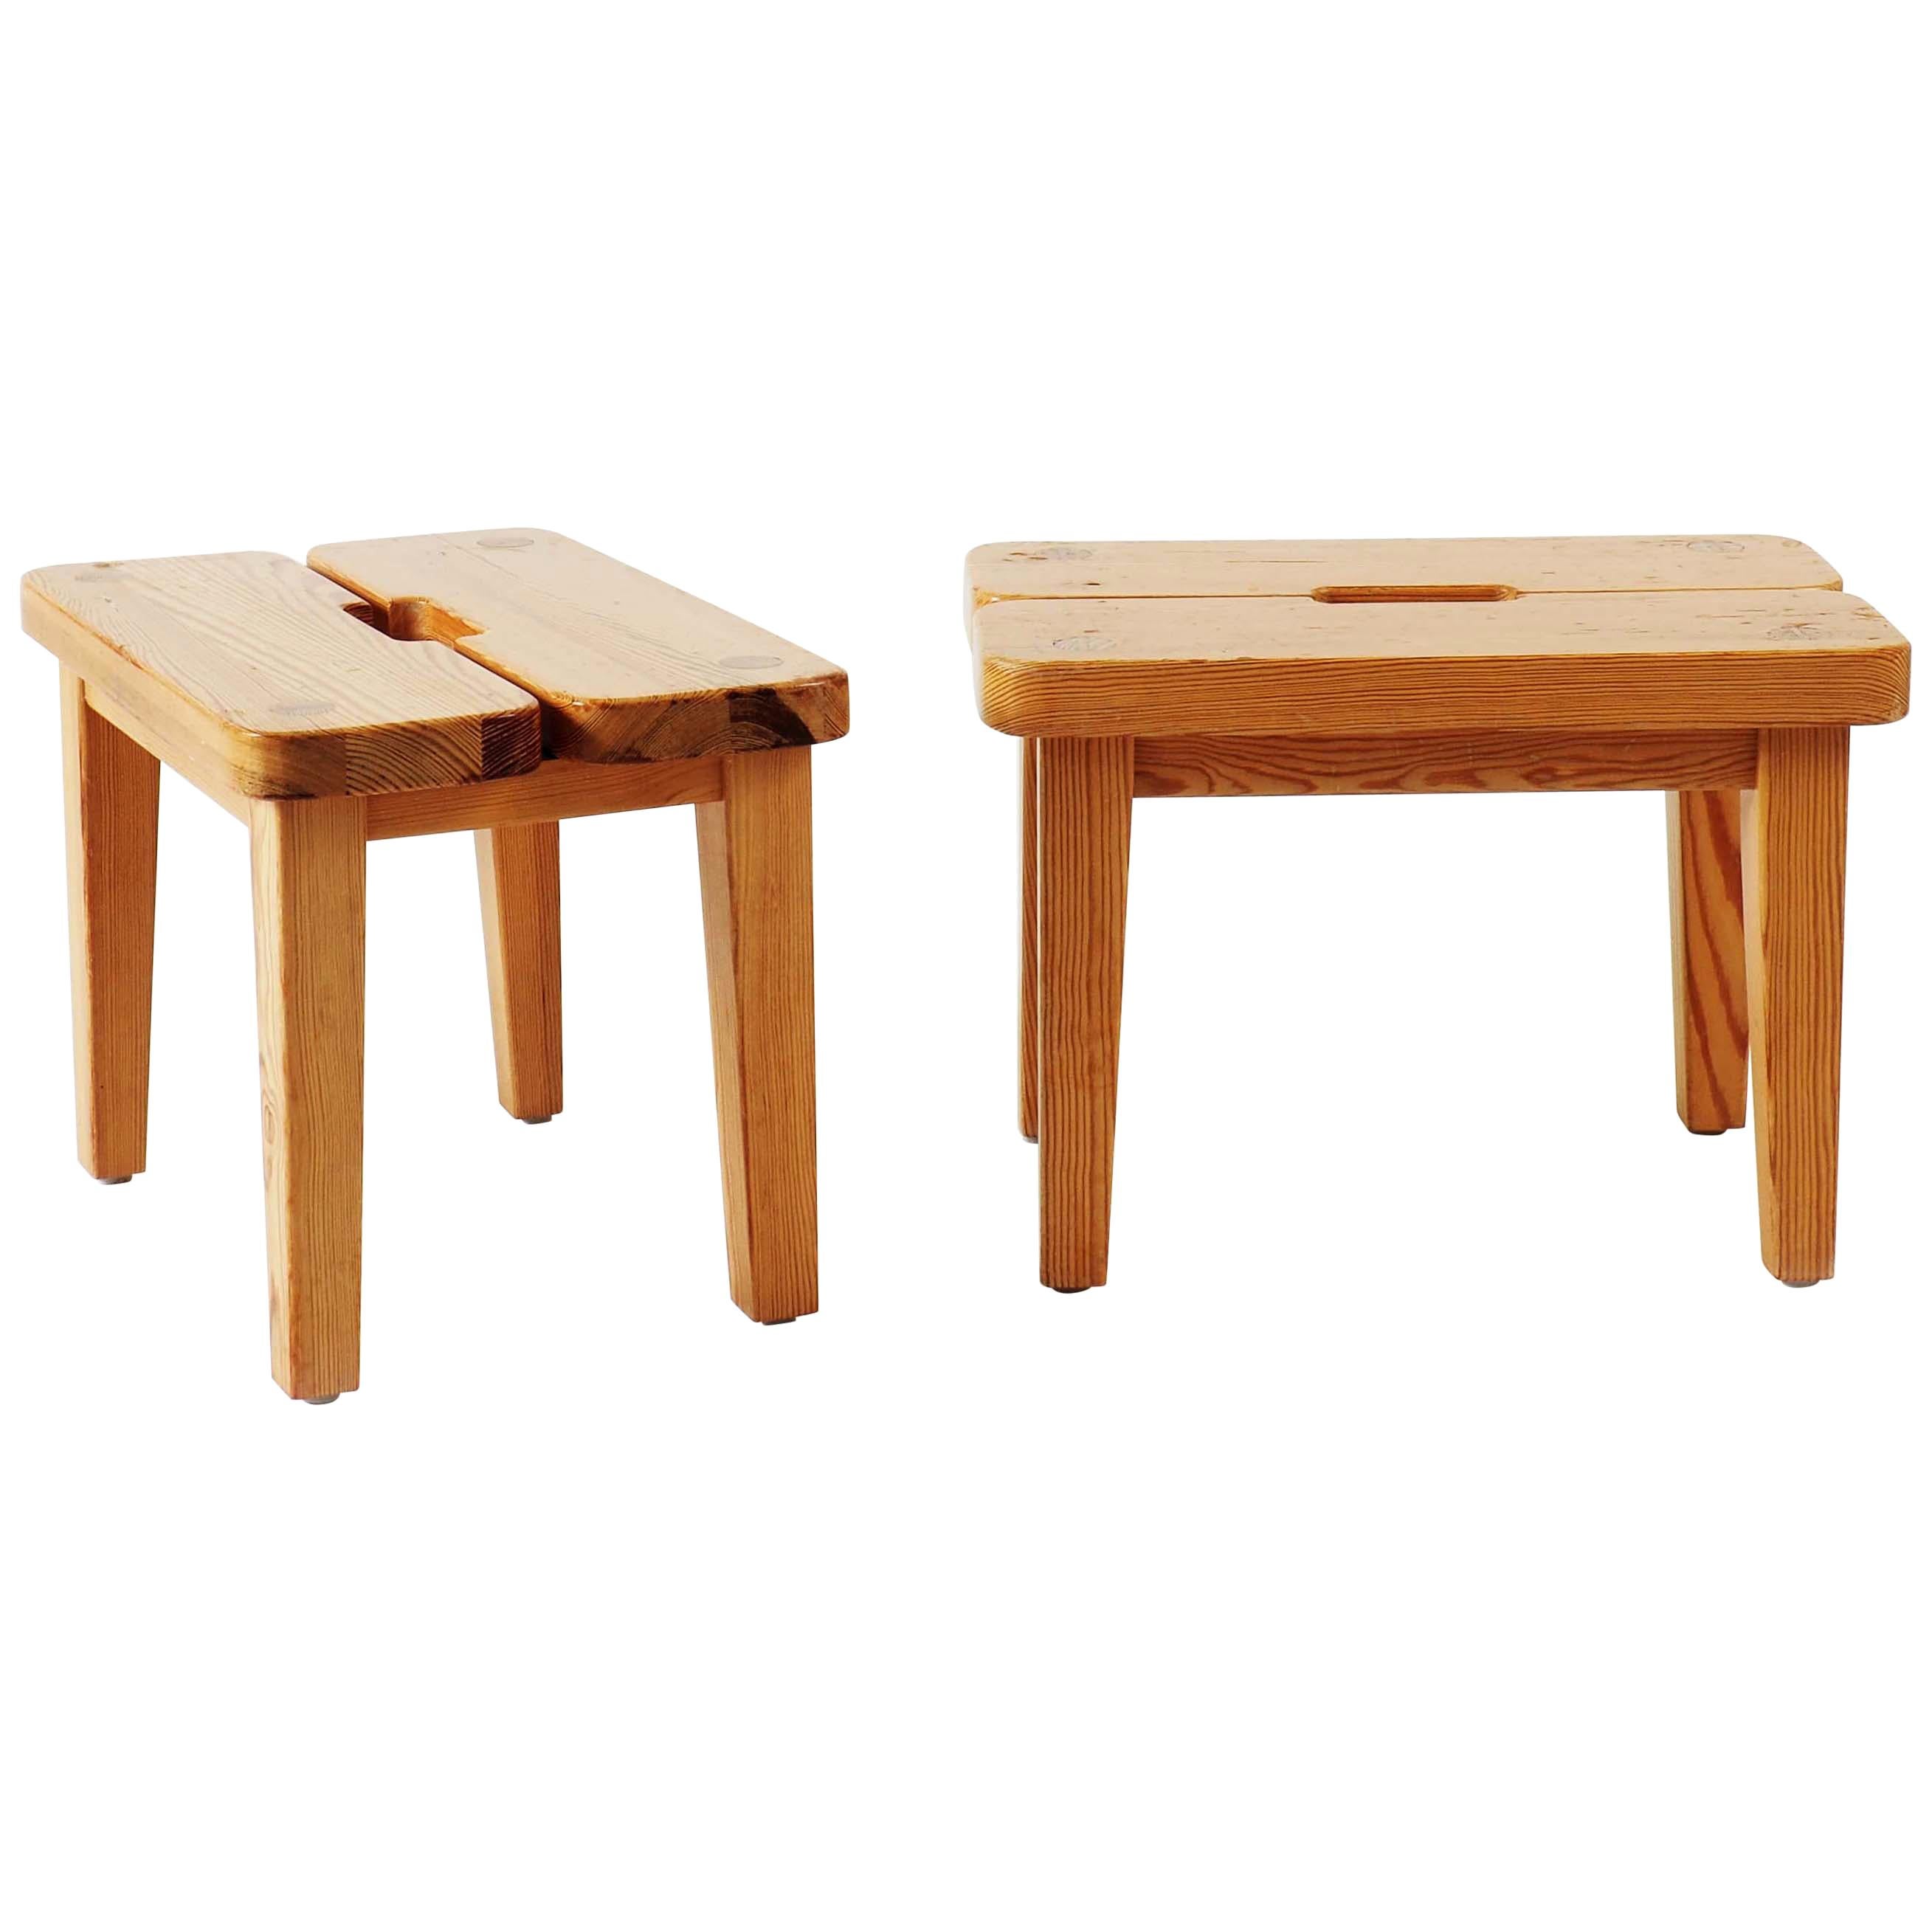 Stools in Pine